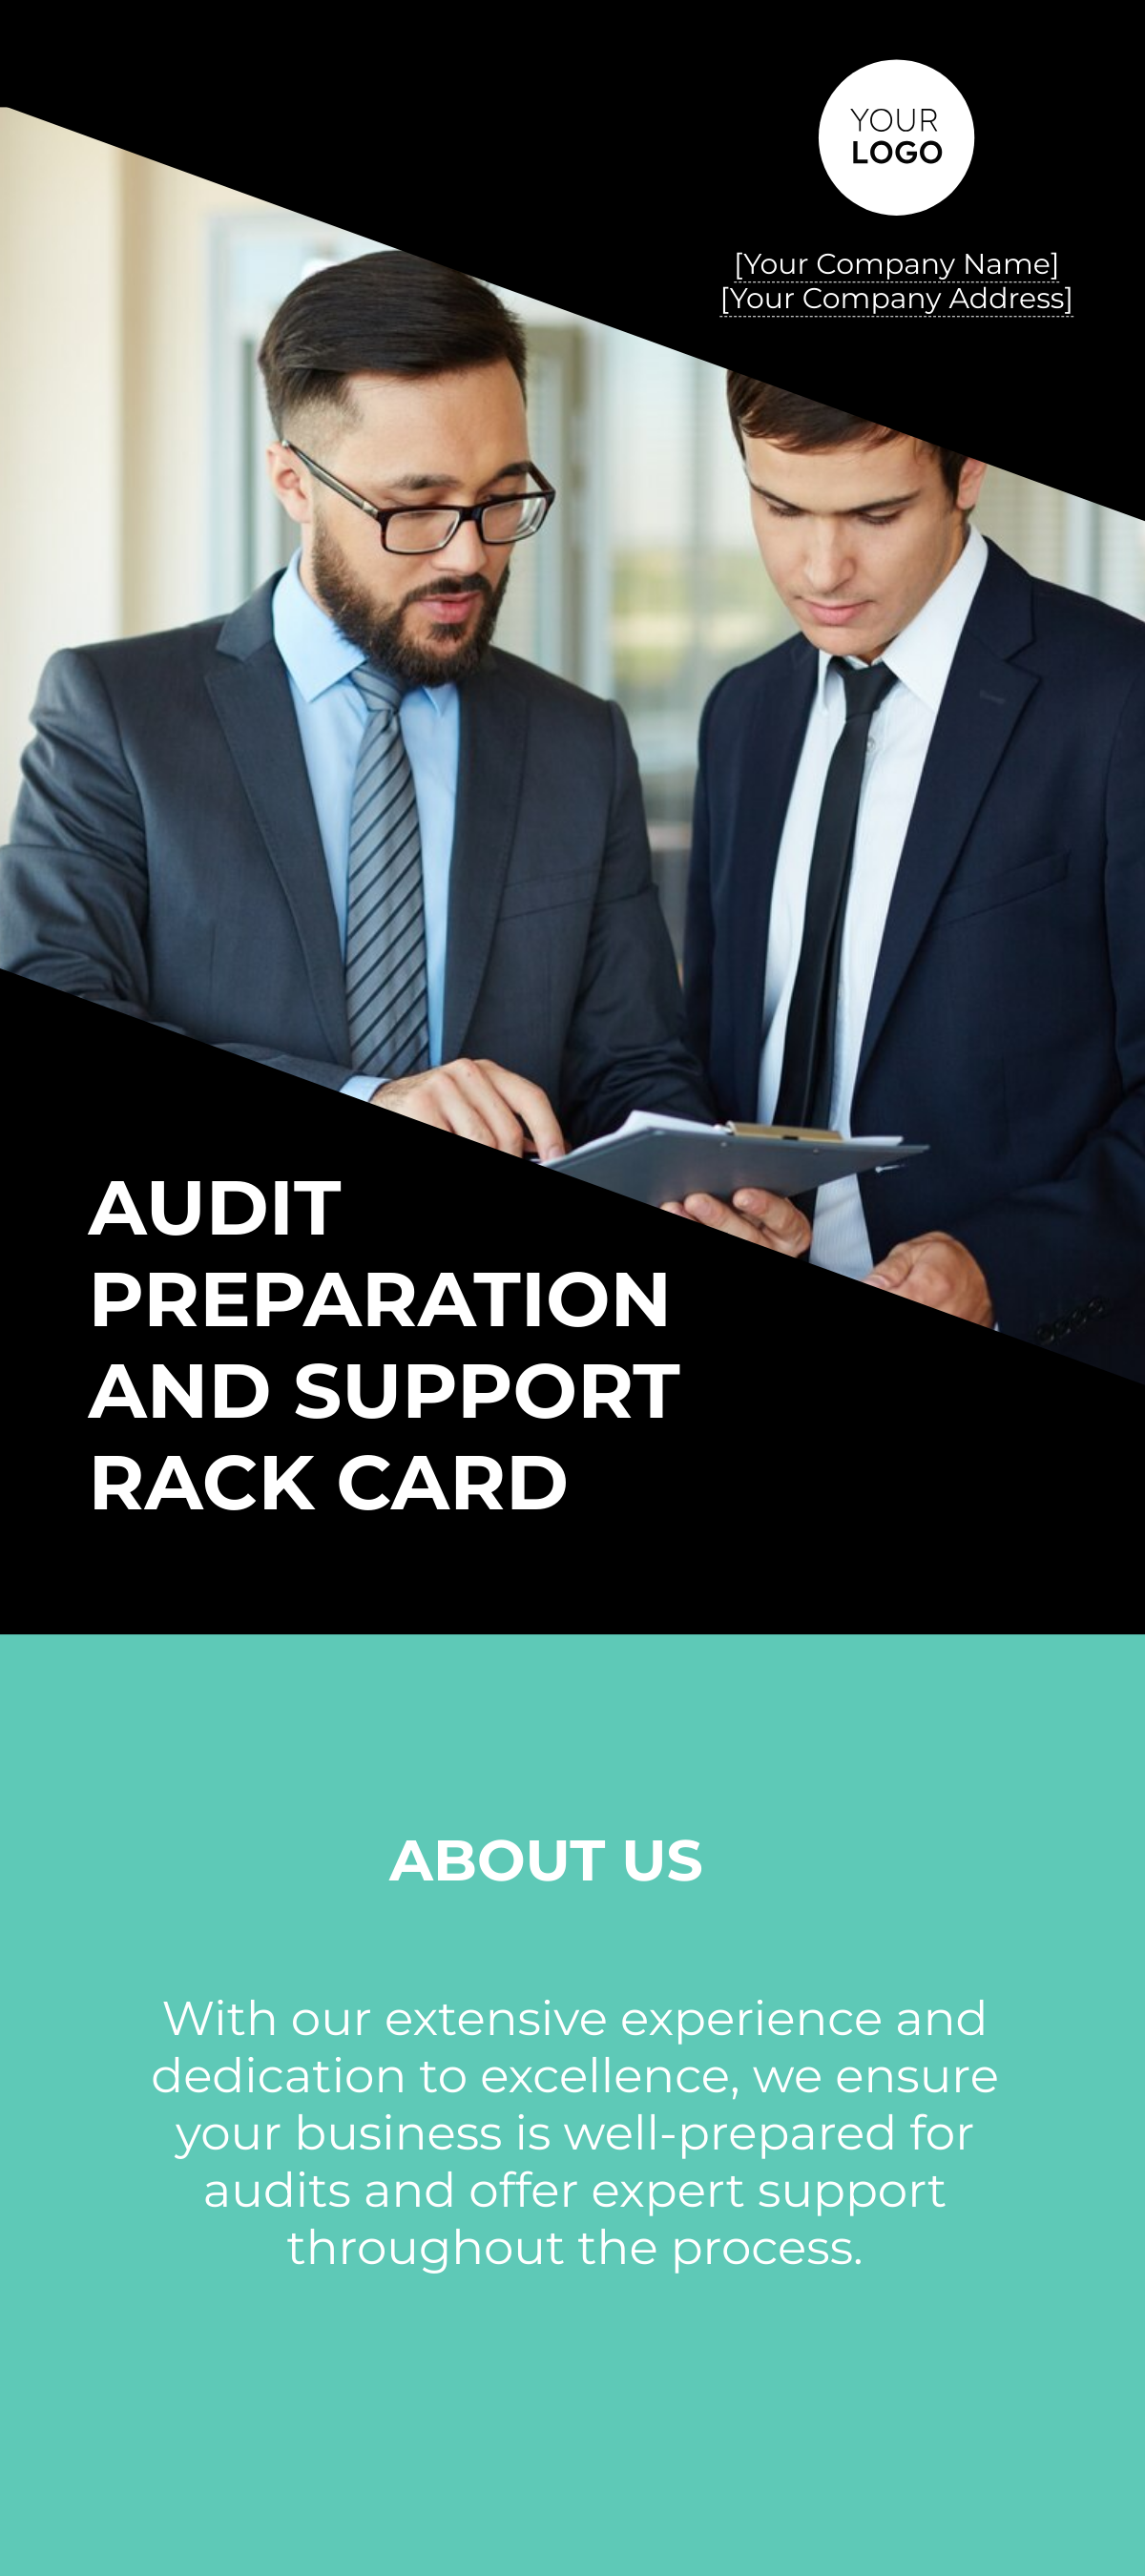 Audit Preparation and Support Rack Card Template